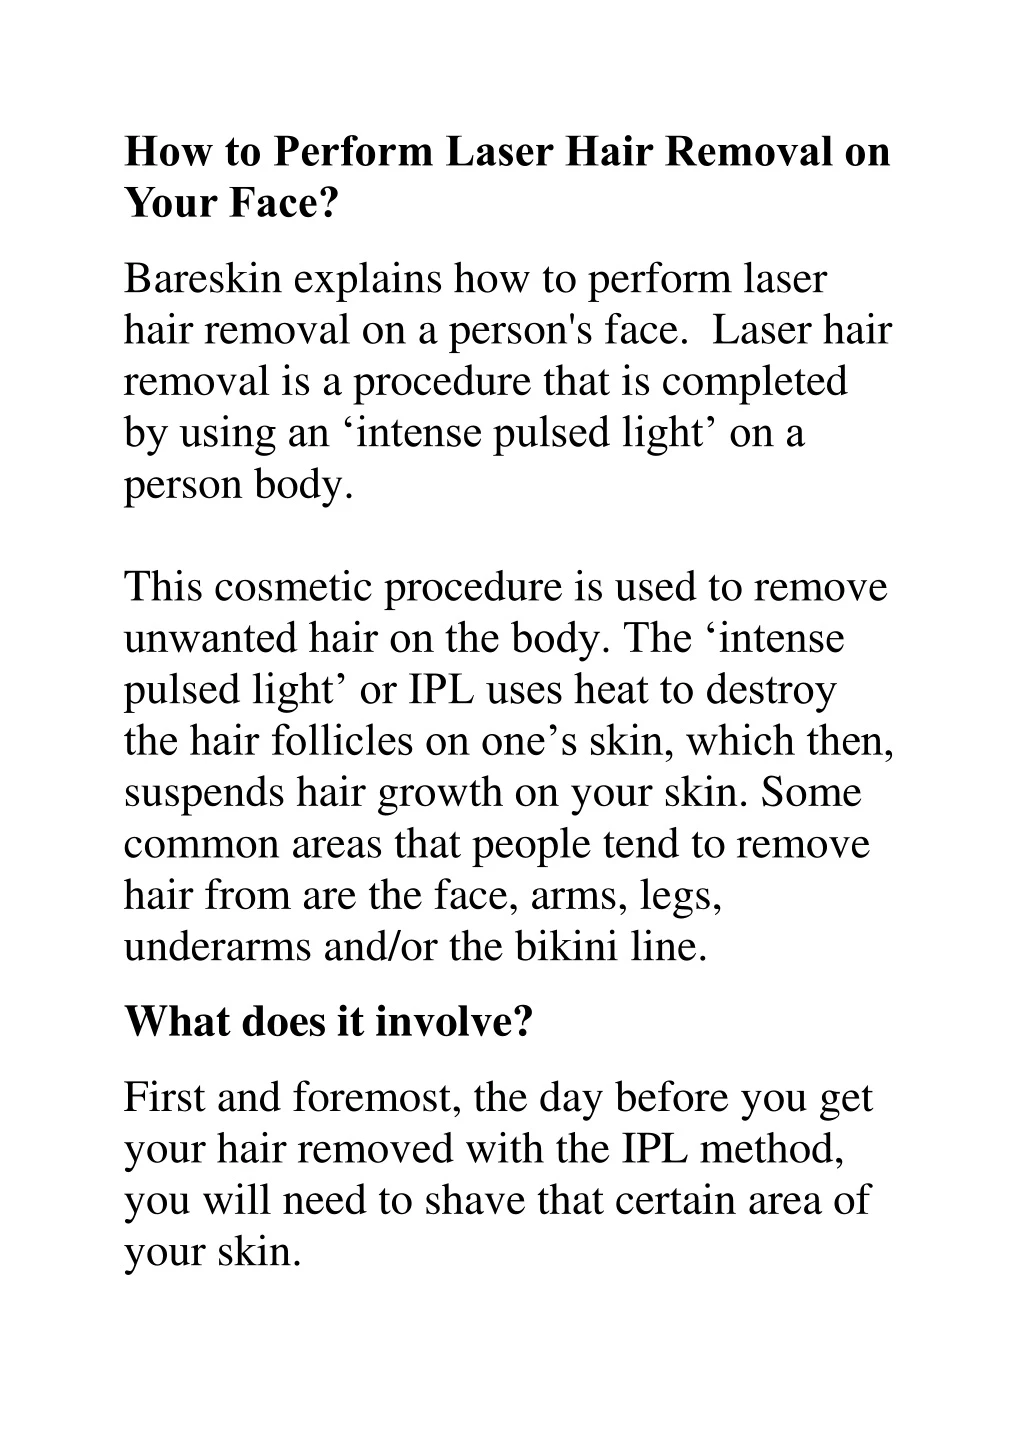 how to perform laser hair removal on your face